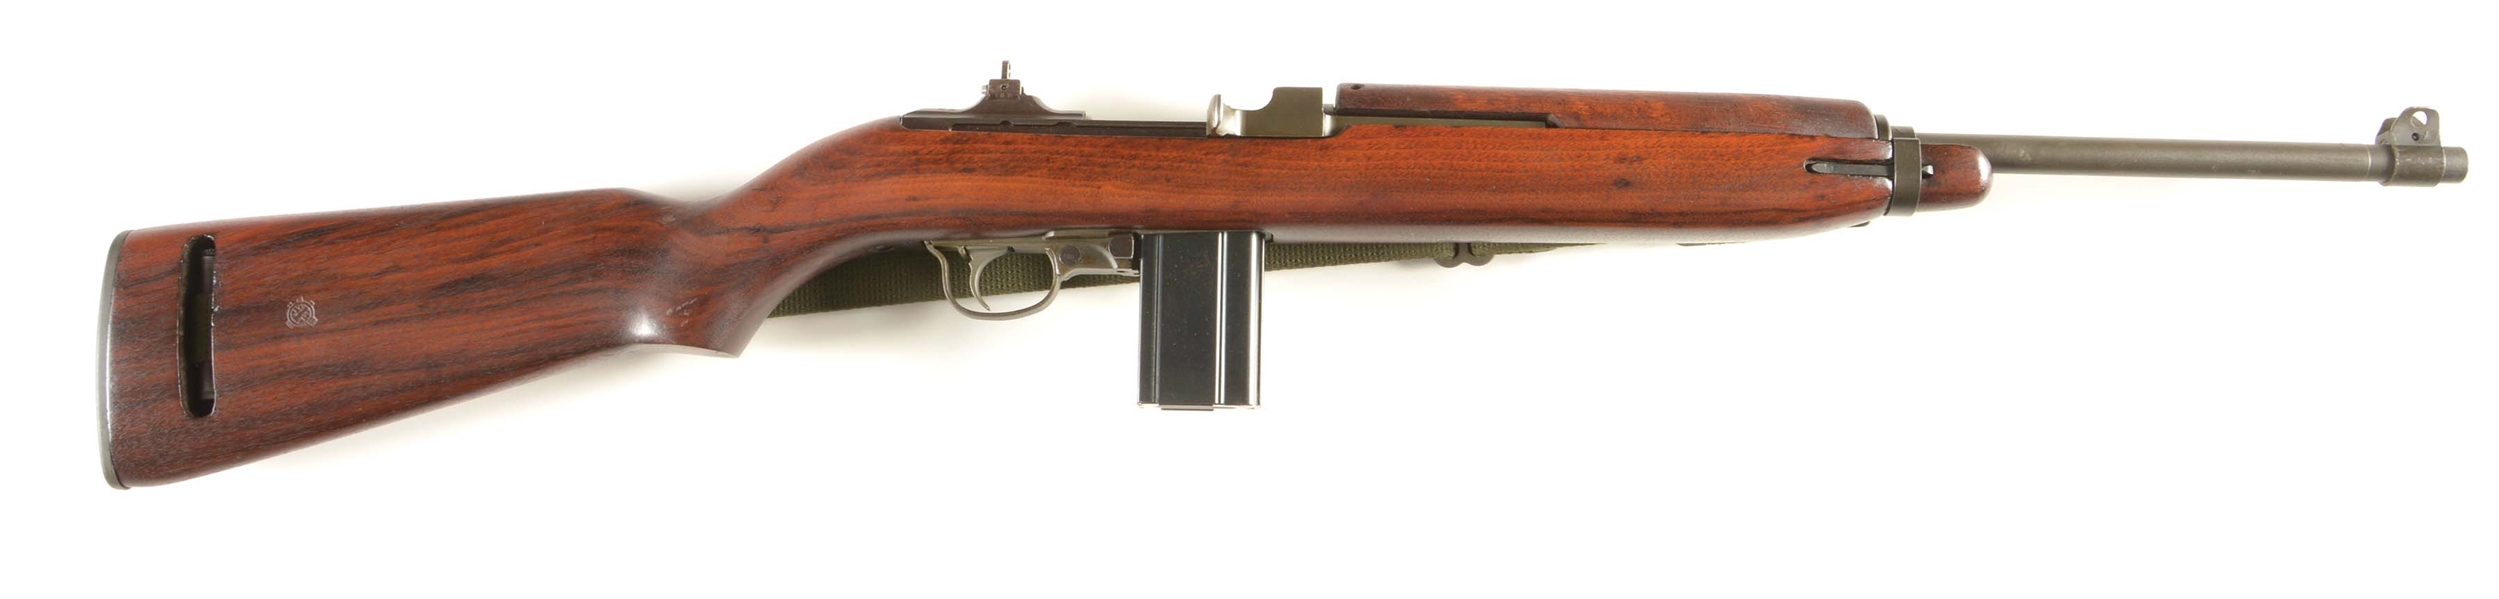 (C) IBM CORP M-1 CARBINE WITH "AO" MARKED RECIEVER.